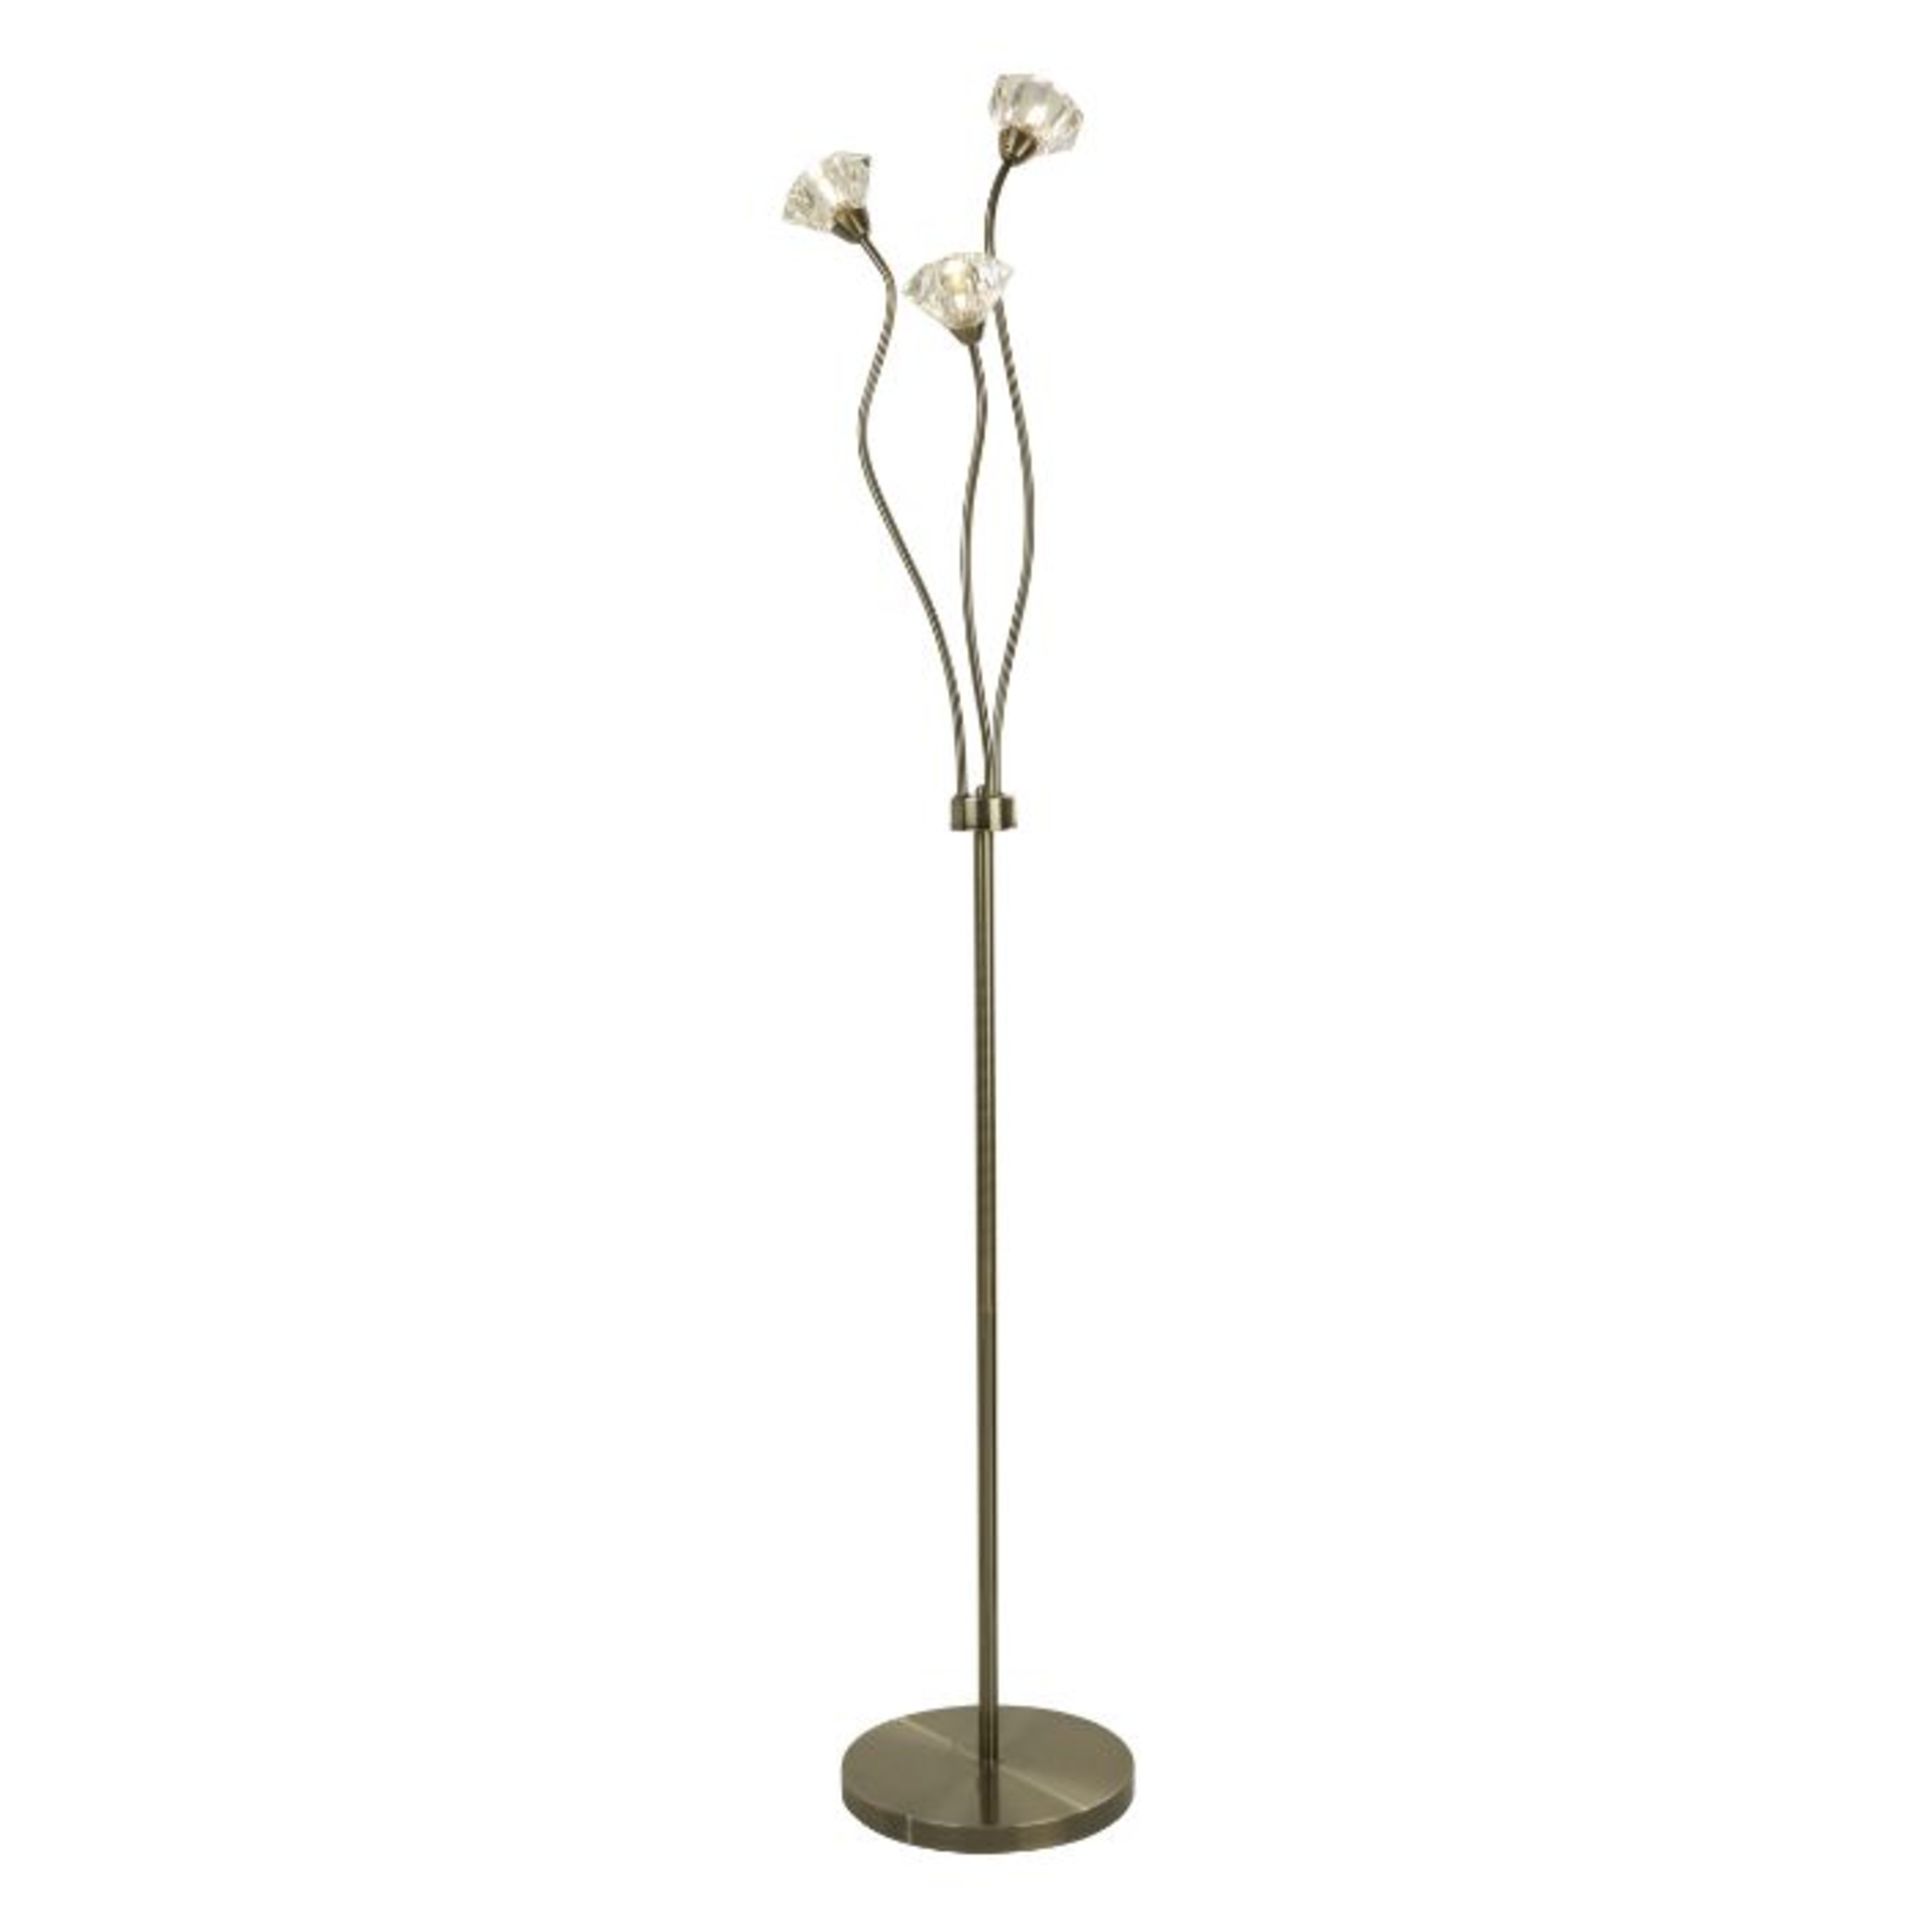 ANTIQUE BRASS AND CLEAR GLASS 3 LIGHT FLOOR LAMP. 160CM HIGH. 3 X 33W, - Floor lamp in antique brass